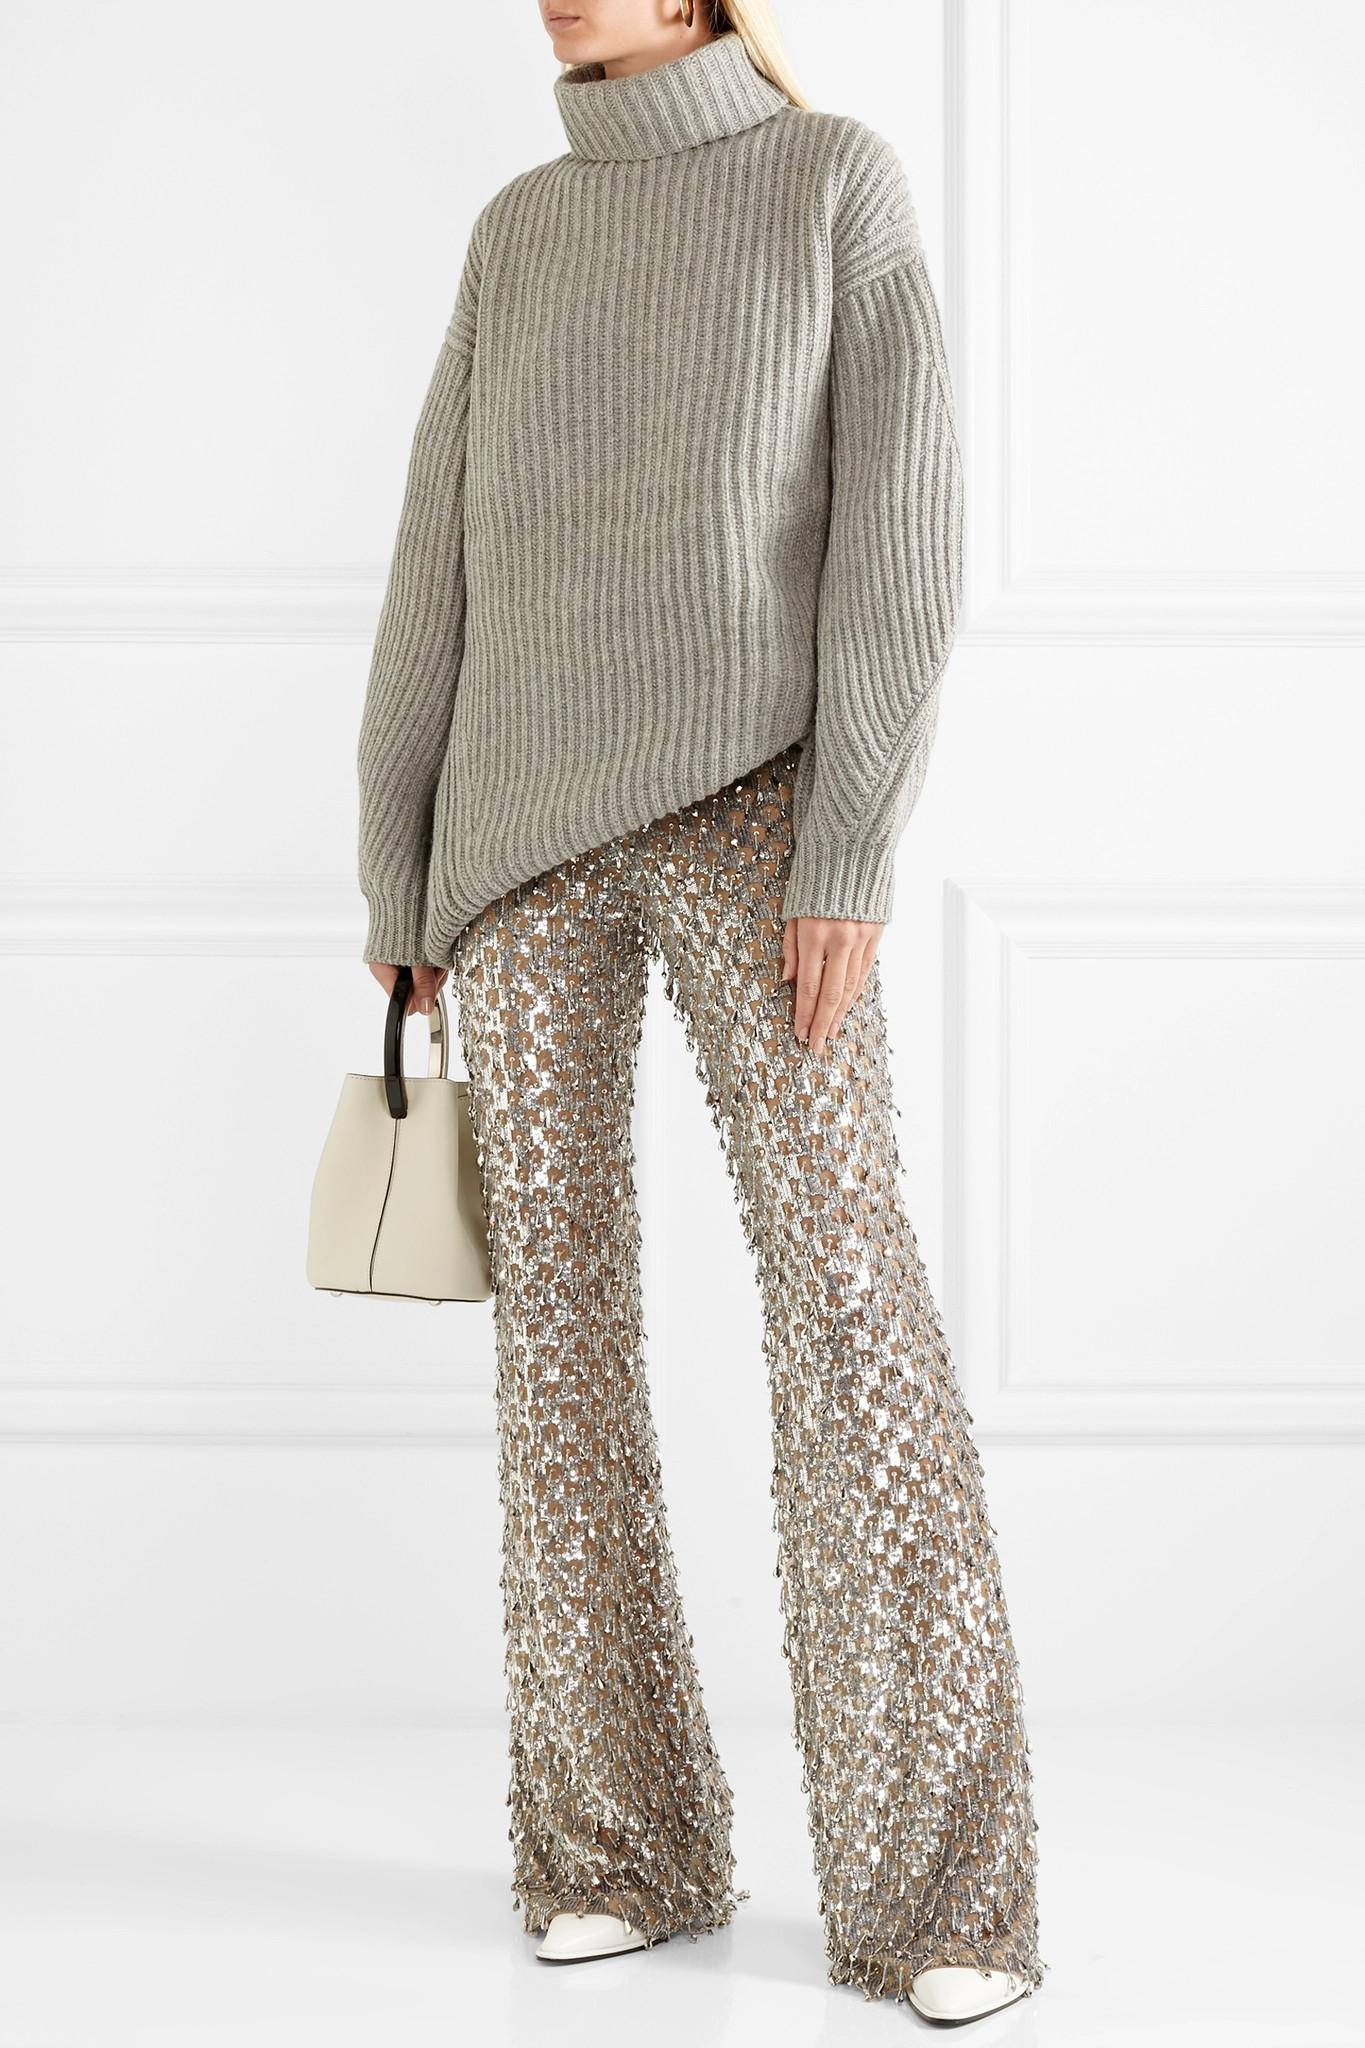 Lyst - Michael Kors Embellished Stretch-tulle Flared Pants in Metallic